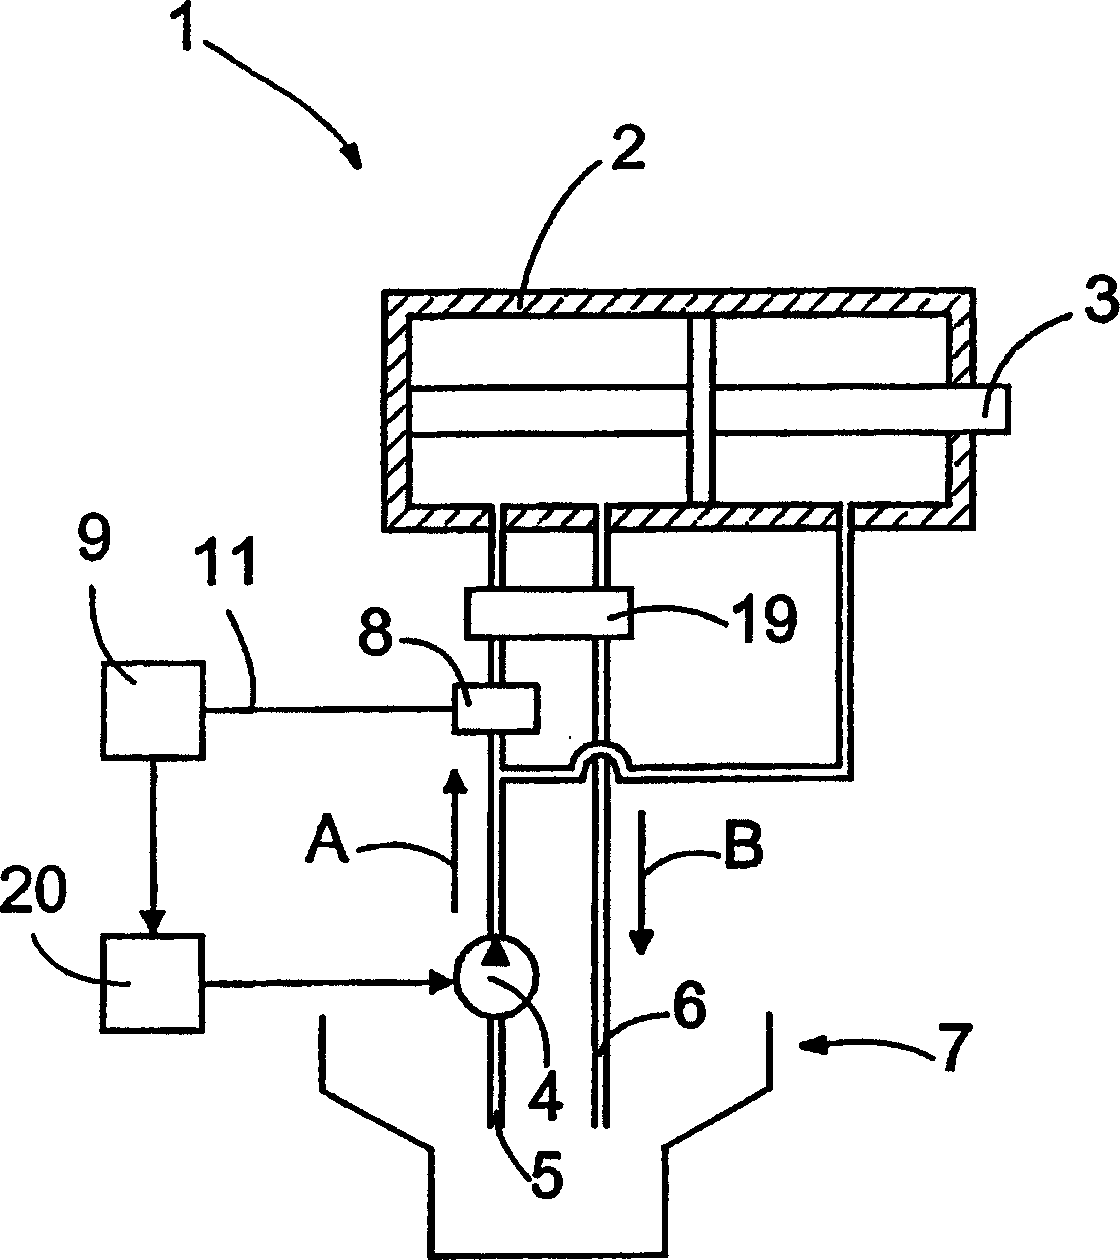 Method and apparatus for monitoring operation of percussion device